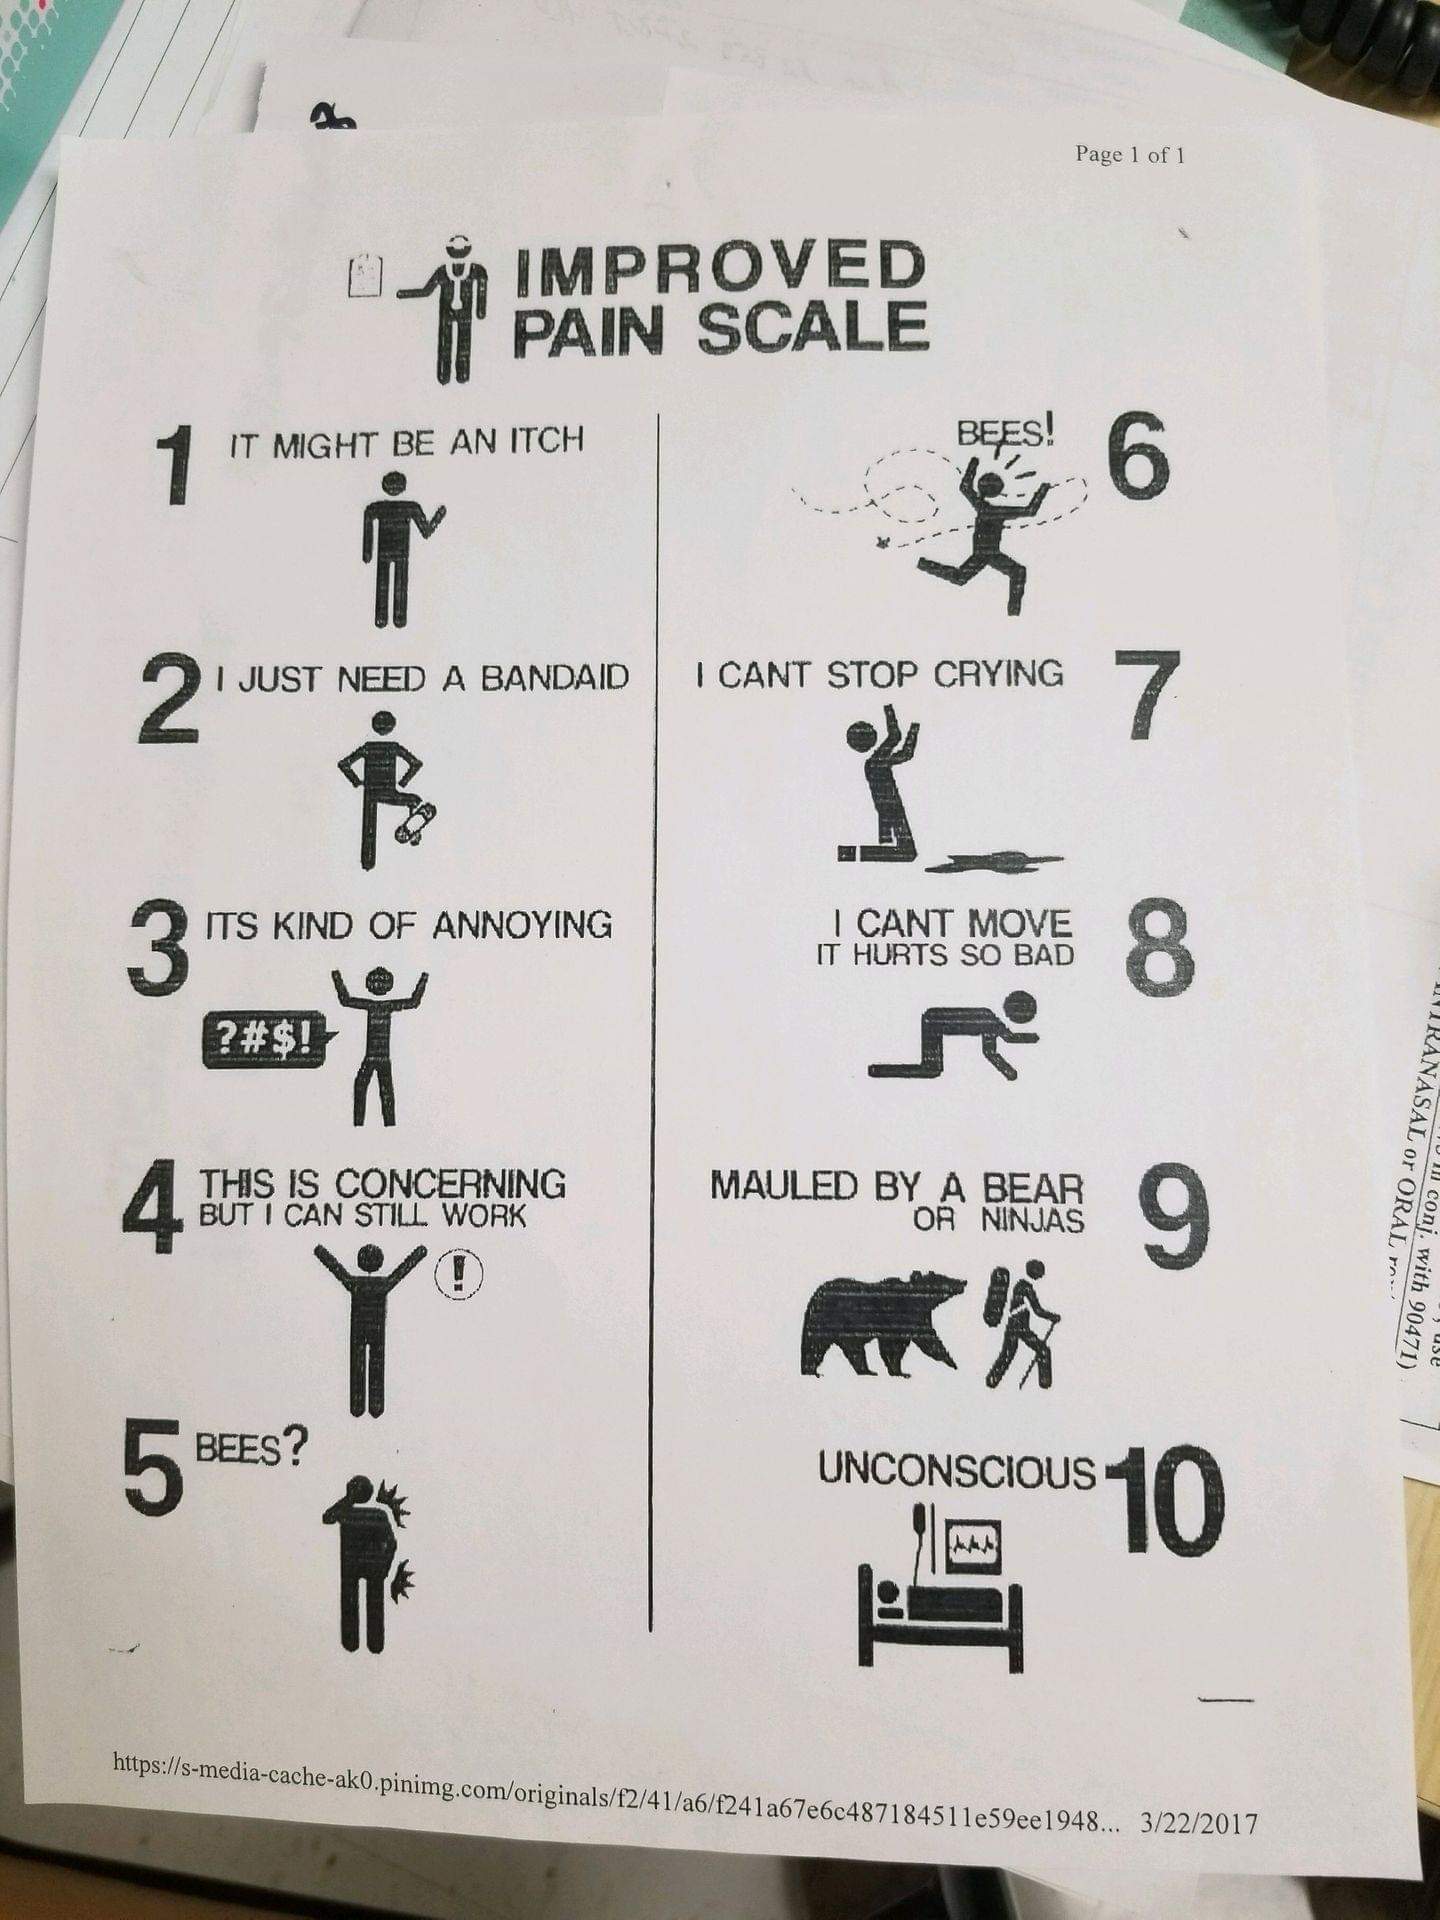 improved pain scale bees - Page 1 of 1 Oy Improved Pain Scale Bees! It Might Be An Itch 1 It Might Bei I Just Need A Bandaid I Cant Stop Crying Its Kind Of Annoying I Cant Move It Hurts So Bad ?#$! This Is Concerning But I Can Still Work Mauled By A Bear 